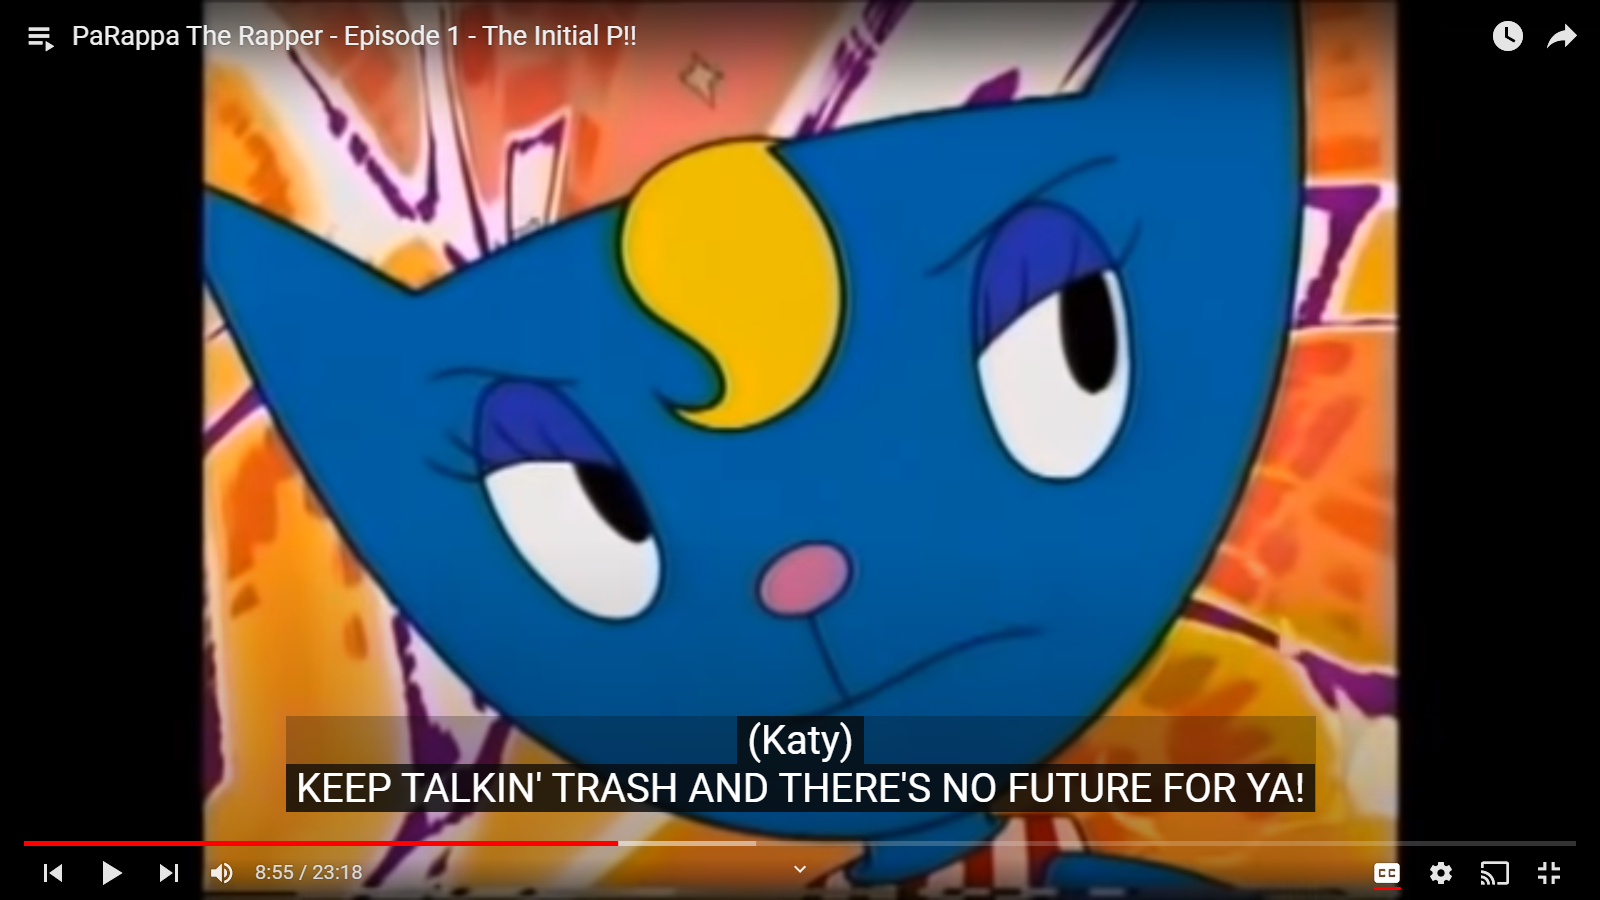 High Quality KEEP TALKIN' TRASH AND THERE'S NO FUTURE FOR YA! Blank Meme Template